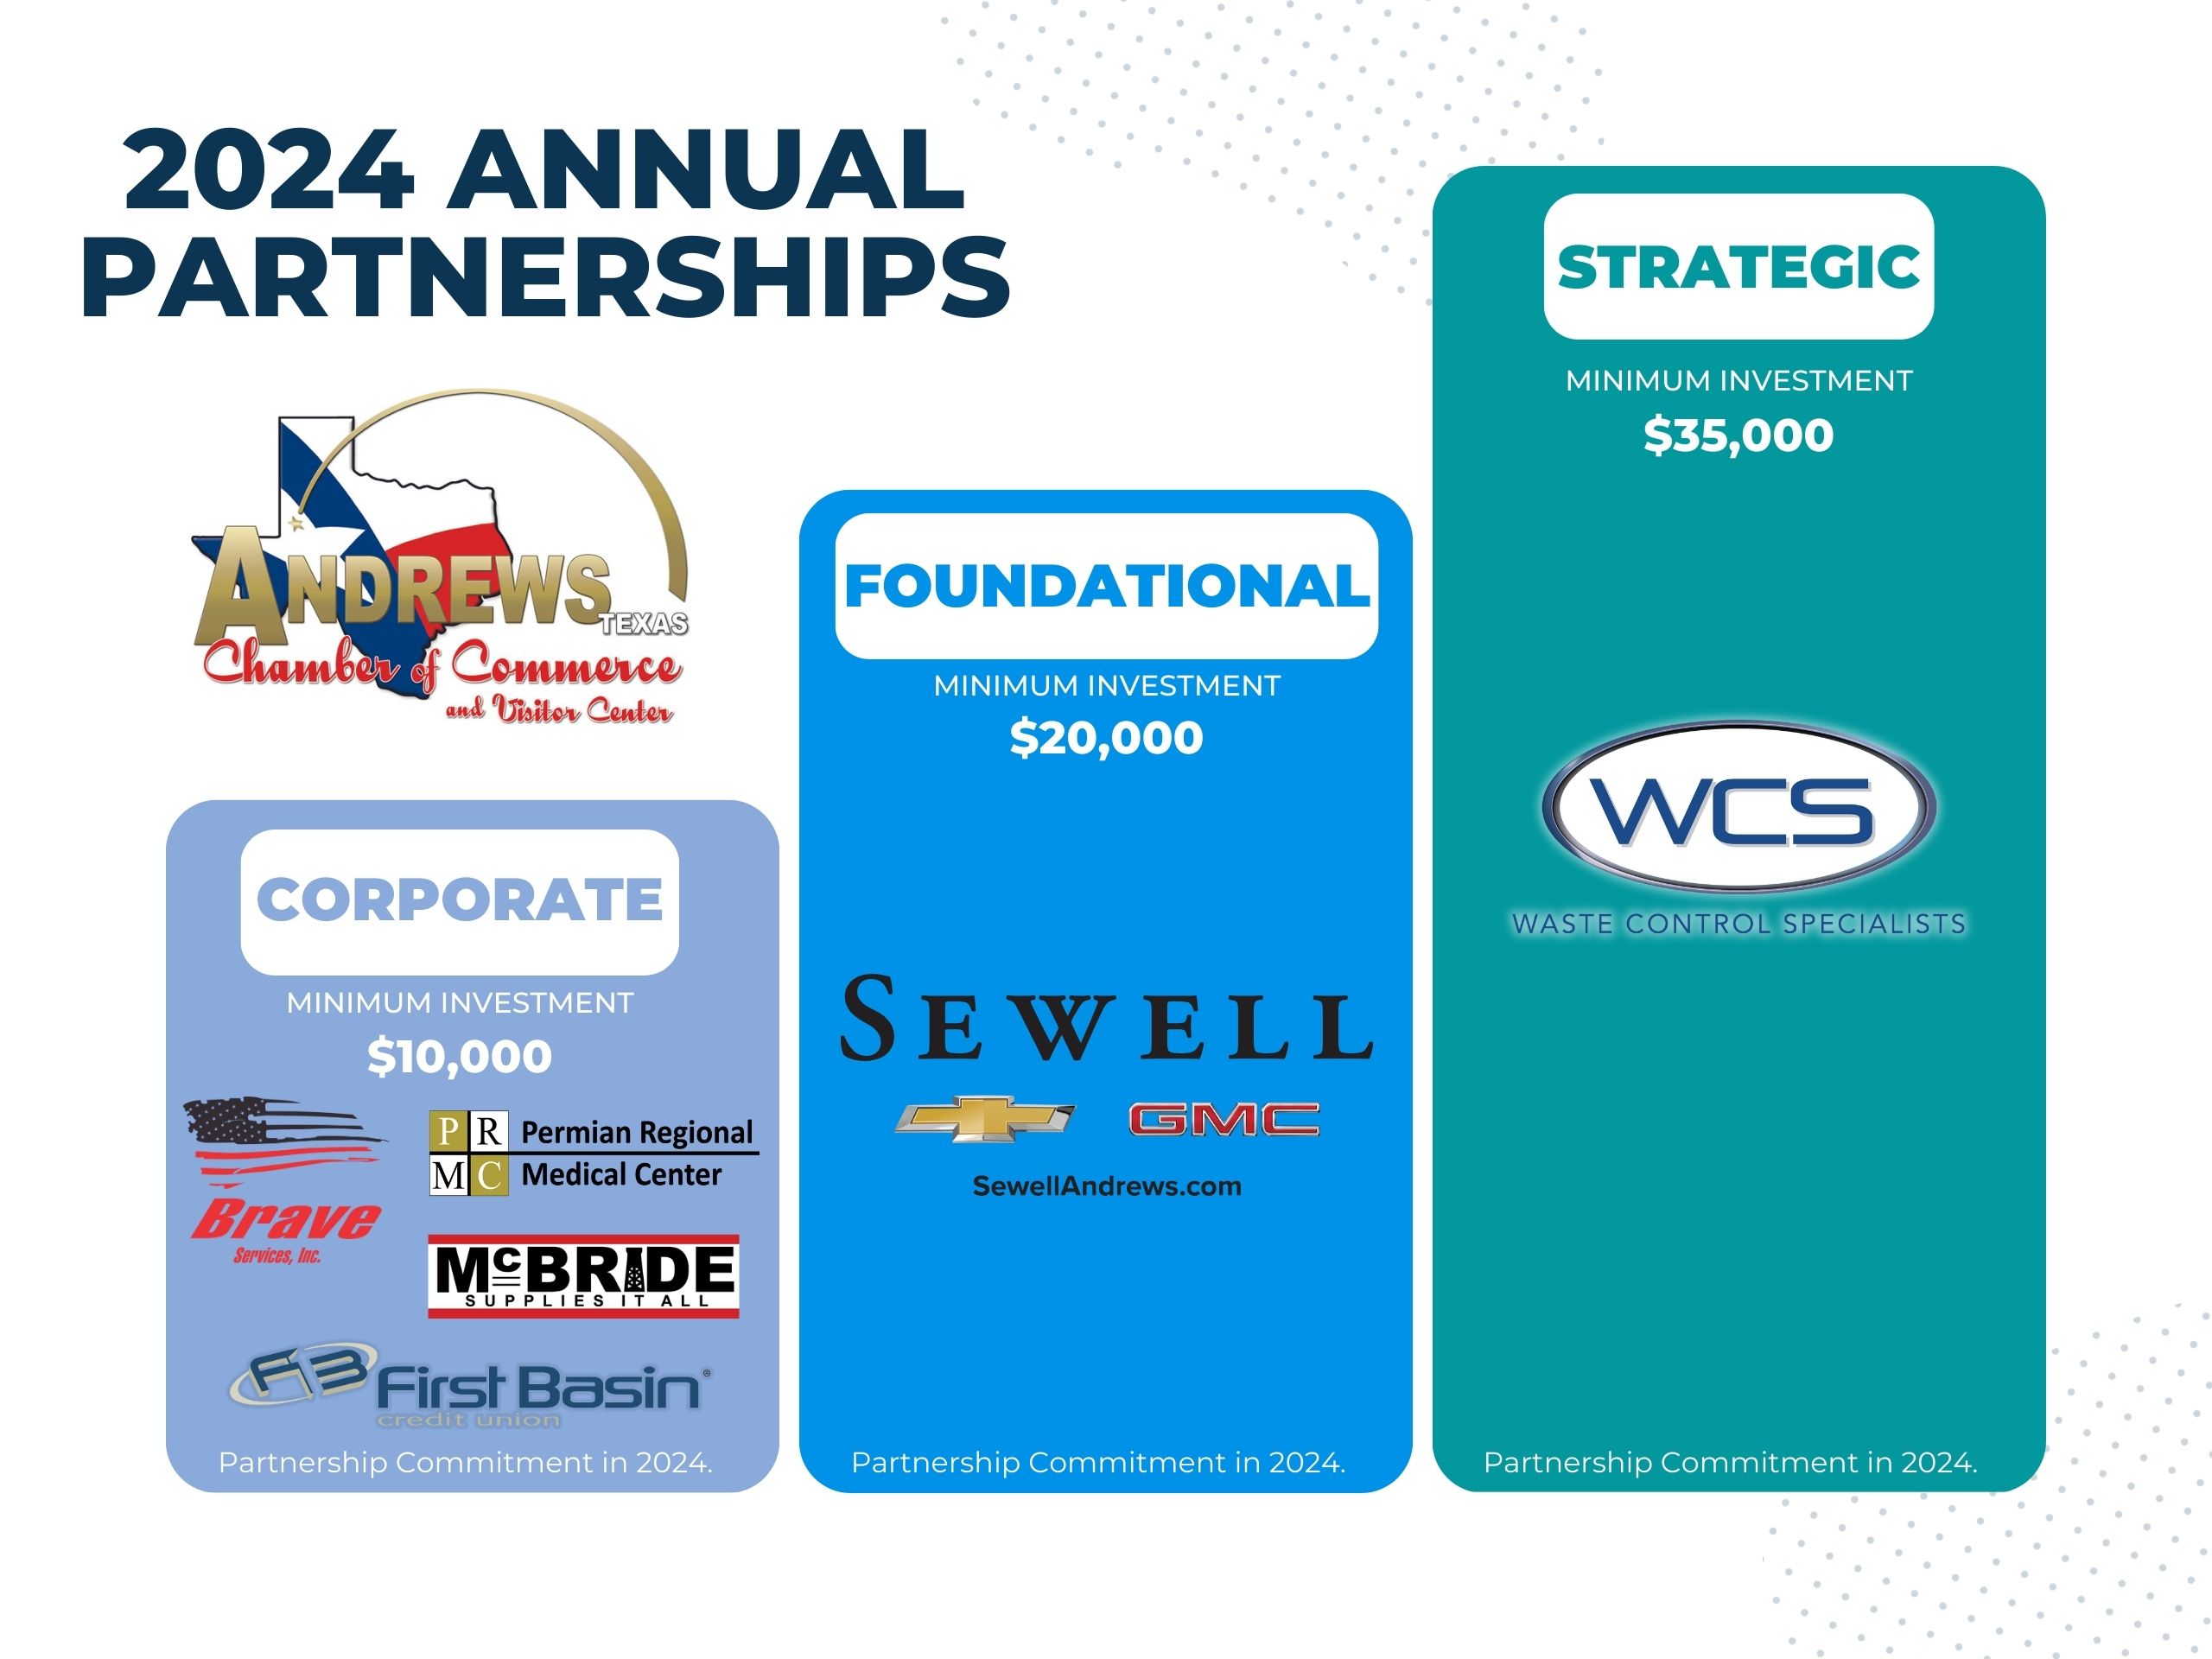 Updated Annual Partnership